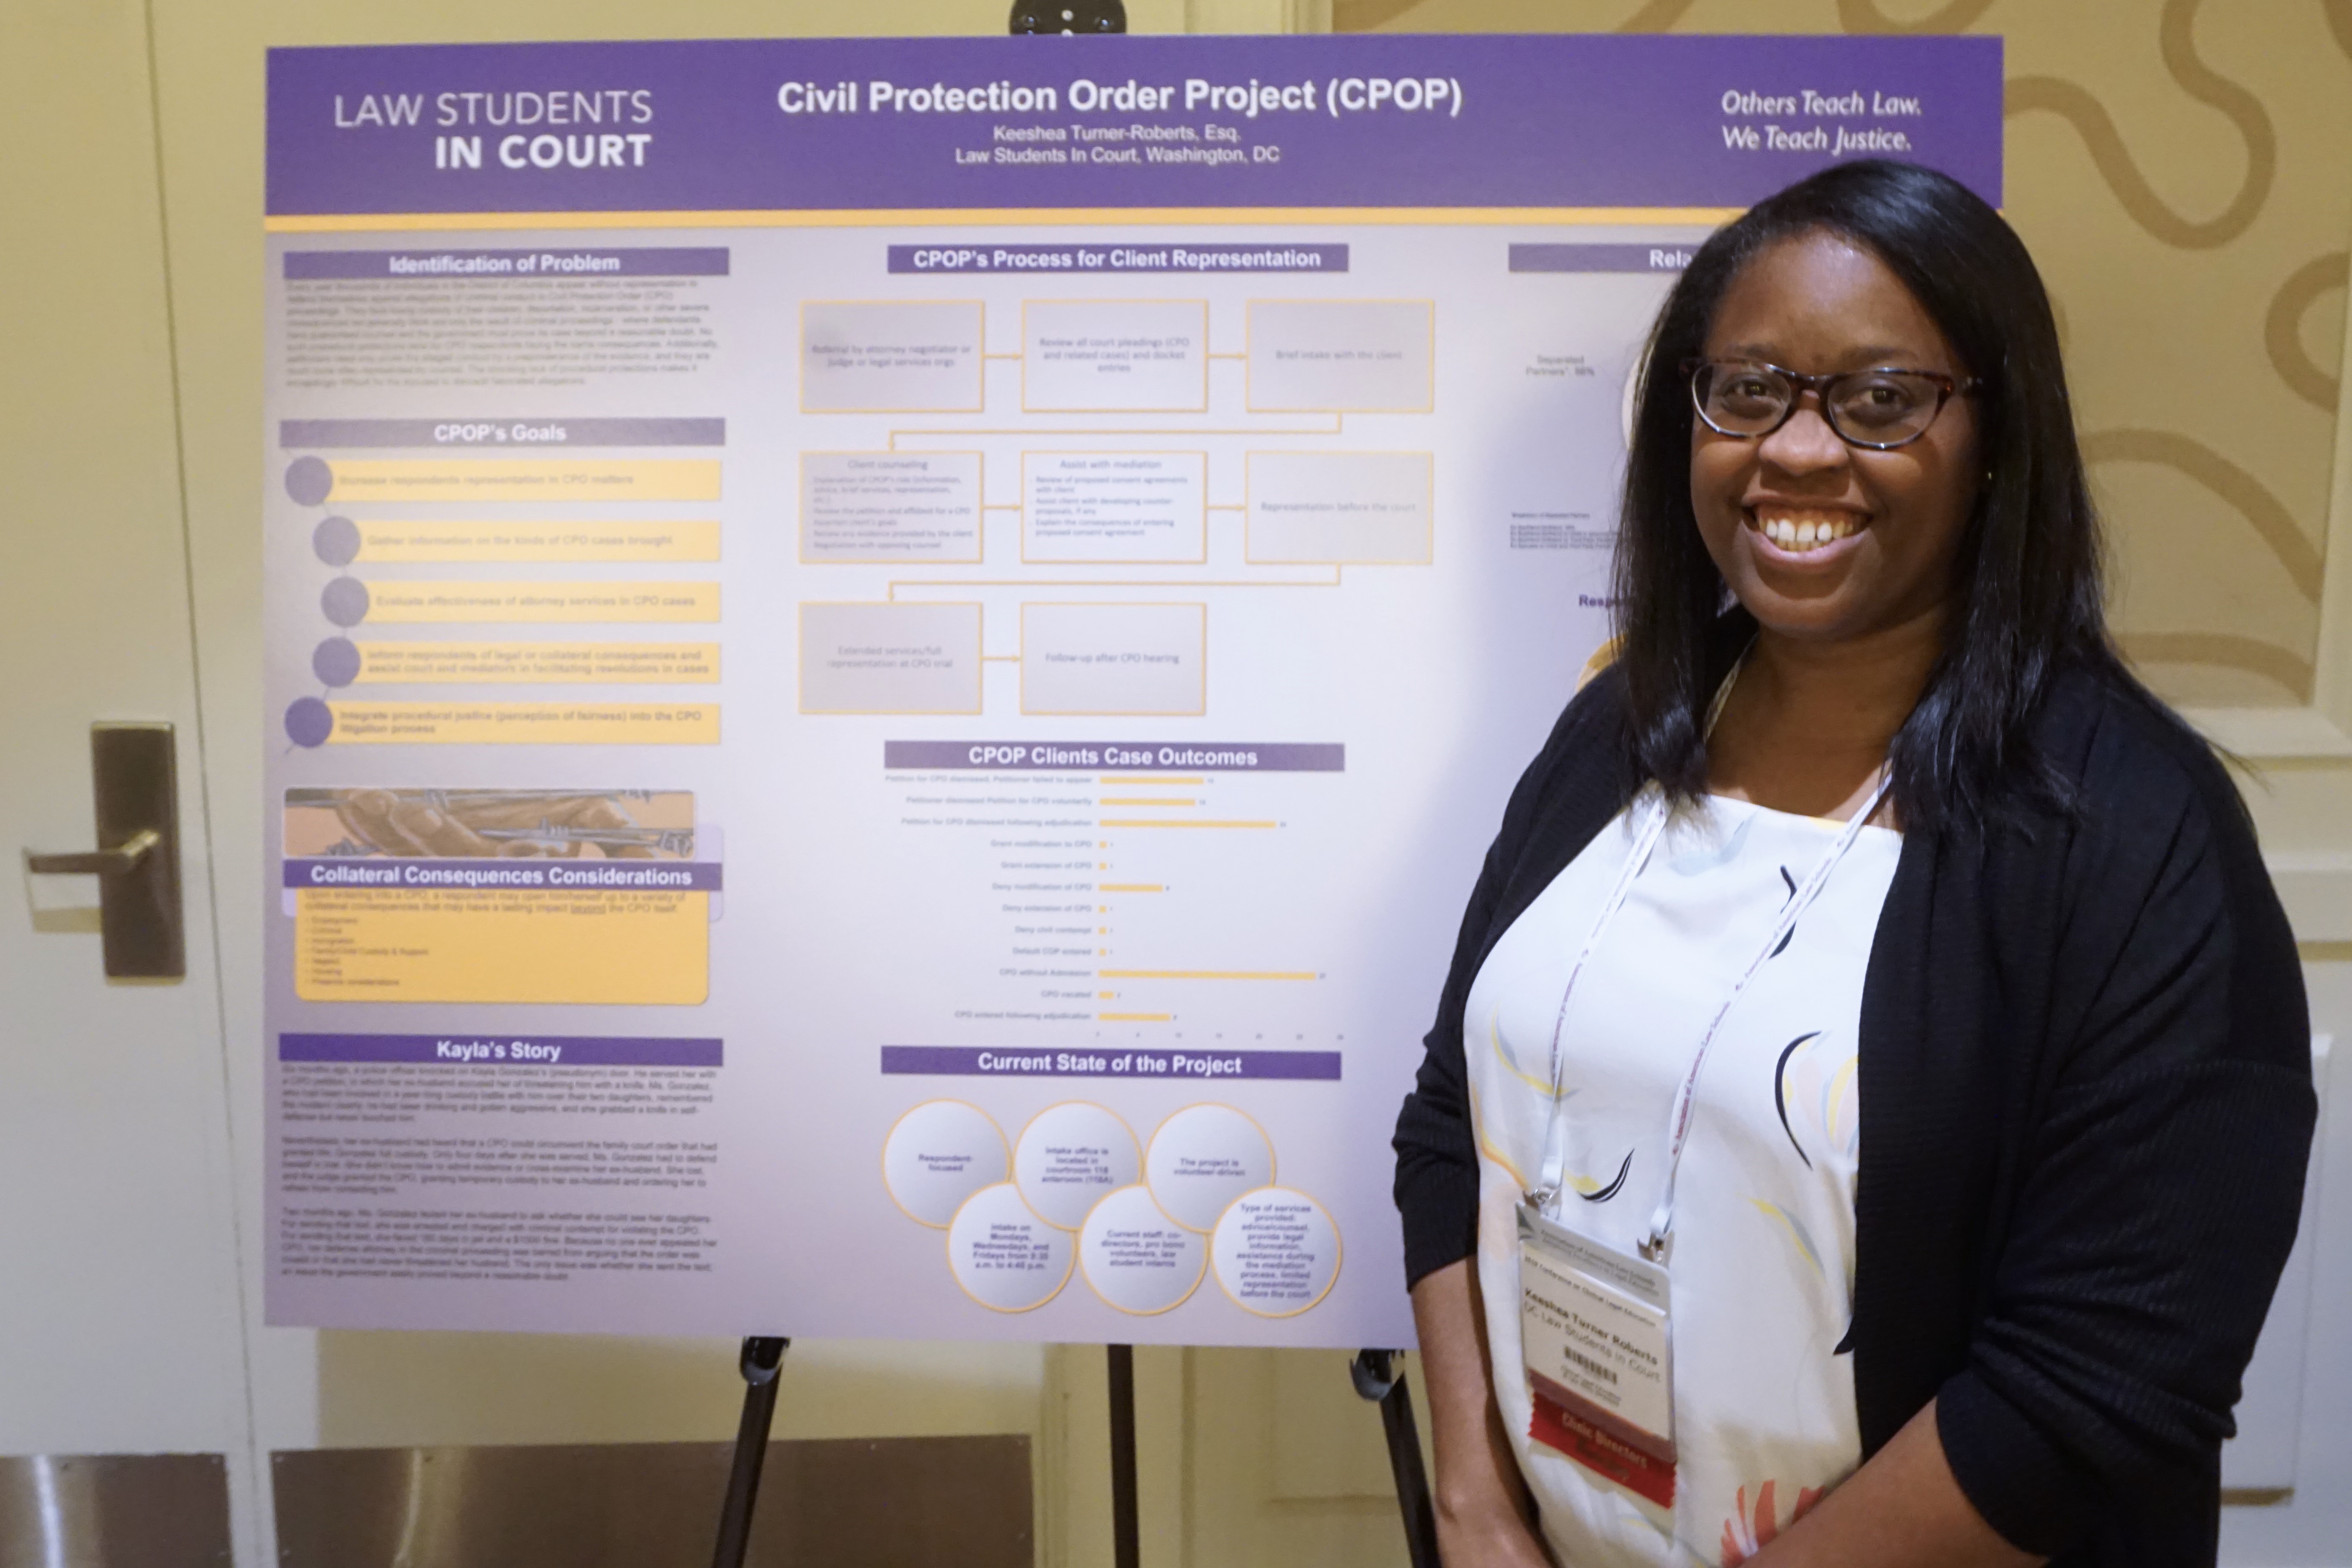 Keeshea Turner Roberts (DC Law Students in Court) displays her group's poster "Ensuring Fairness in the Process: Civil Protection Order Project."